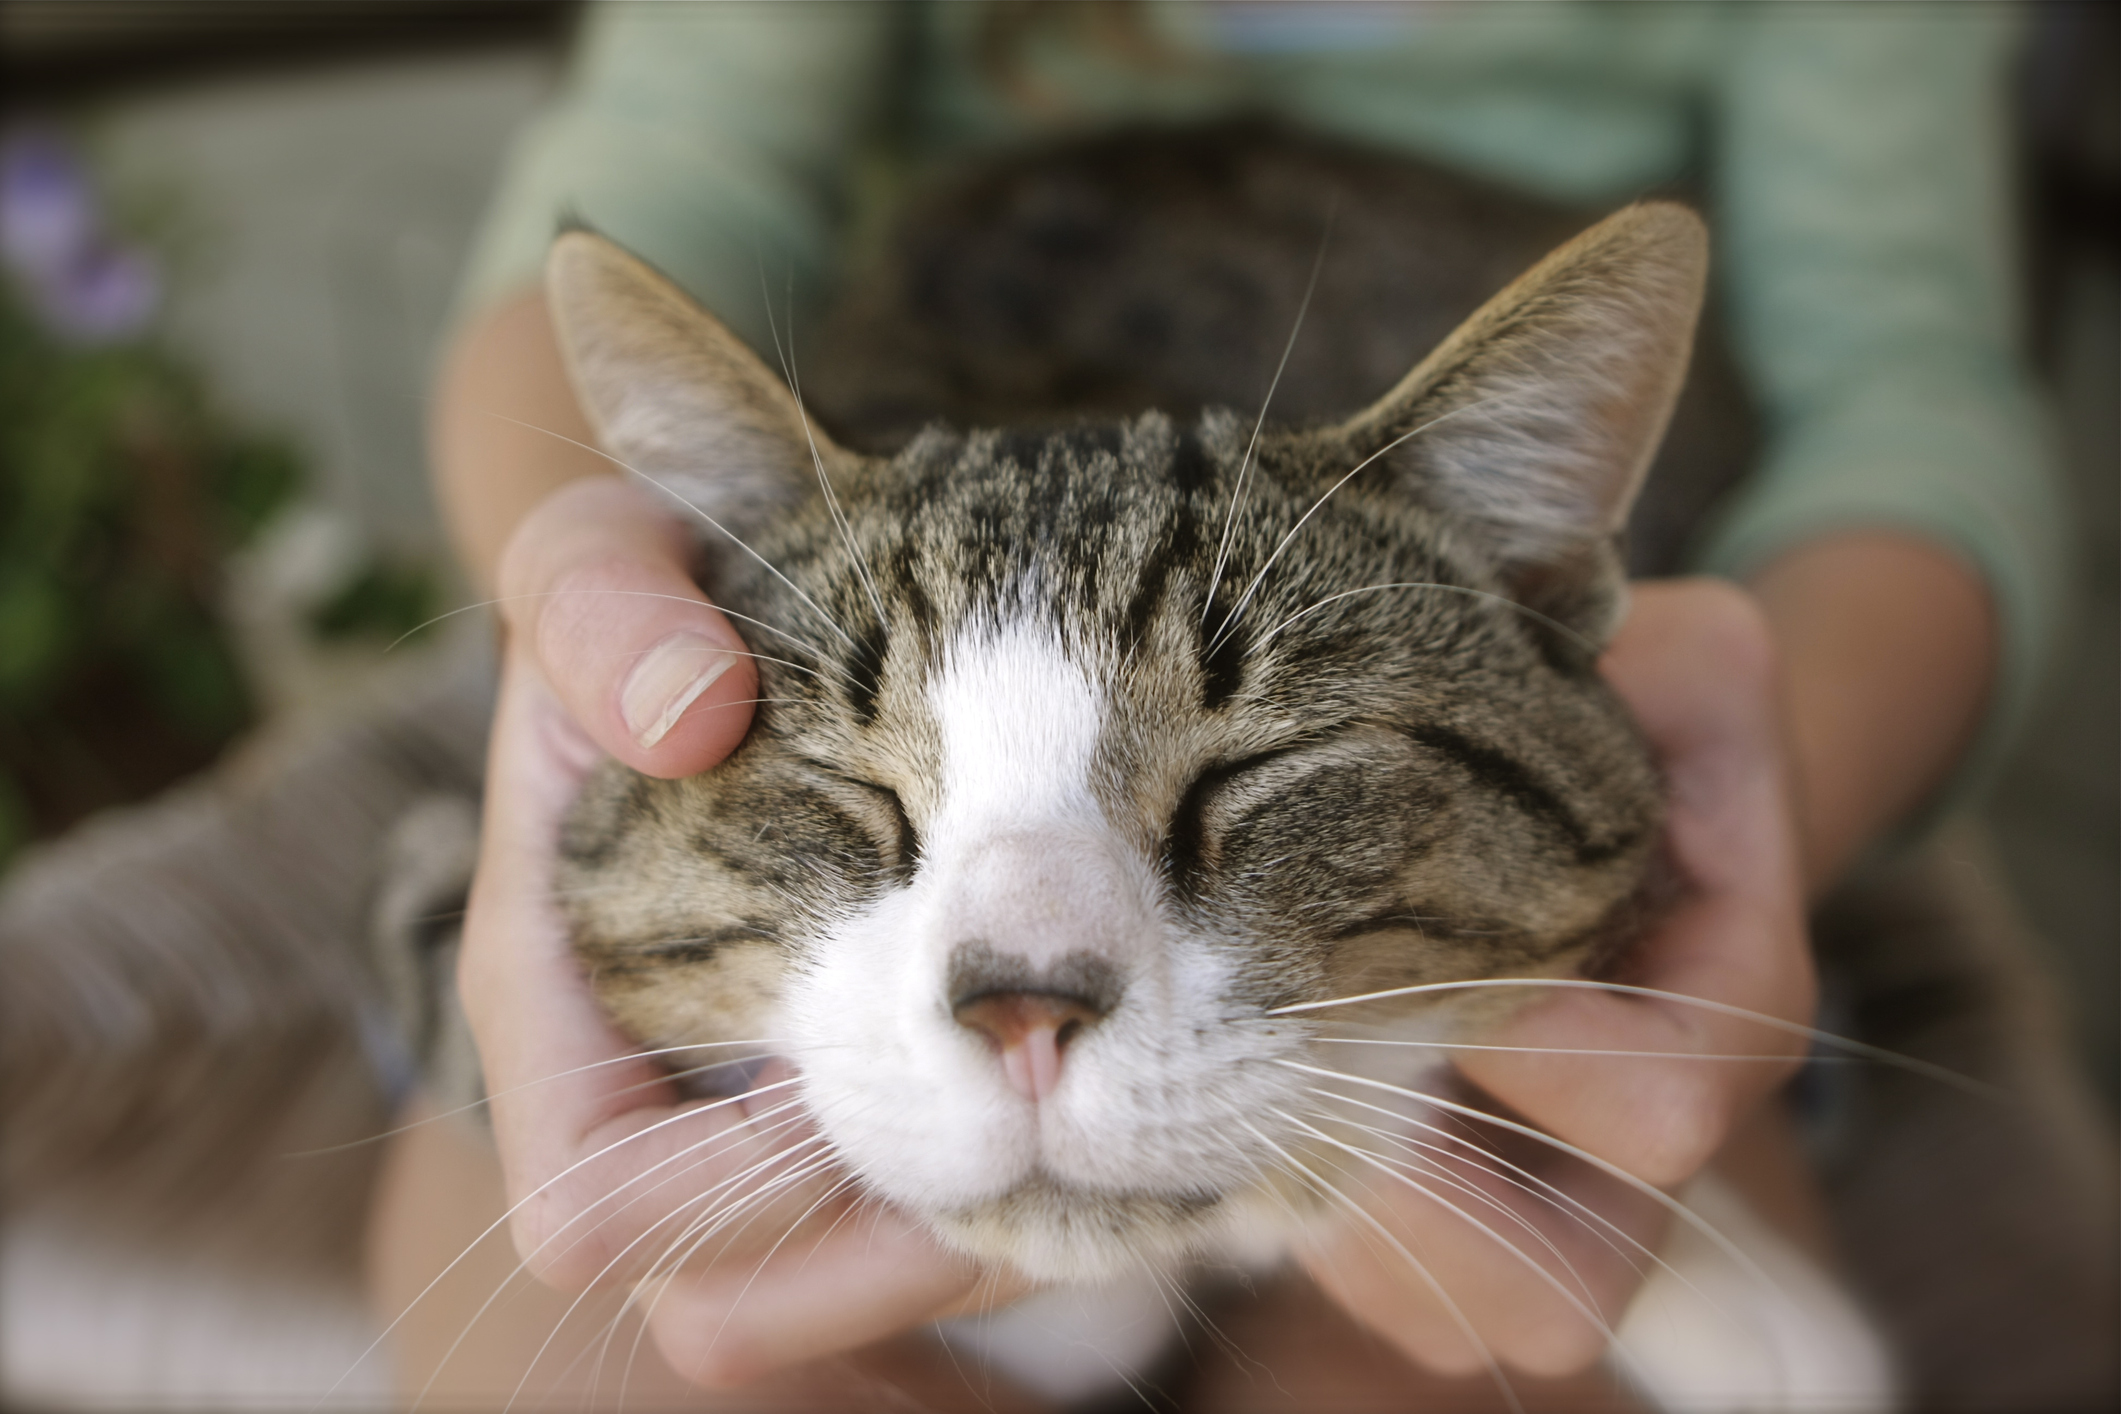 Tabby cat closes eyes in contentment while pet parent massages their face